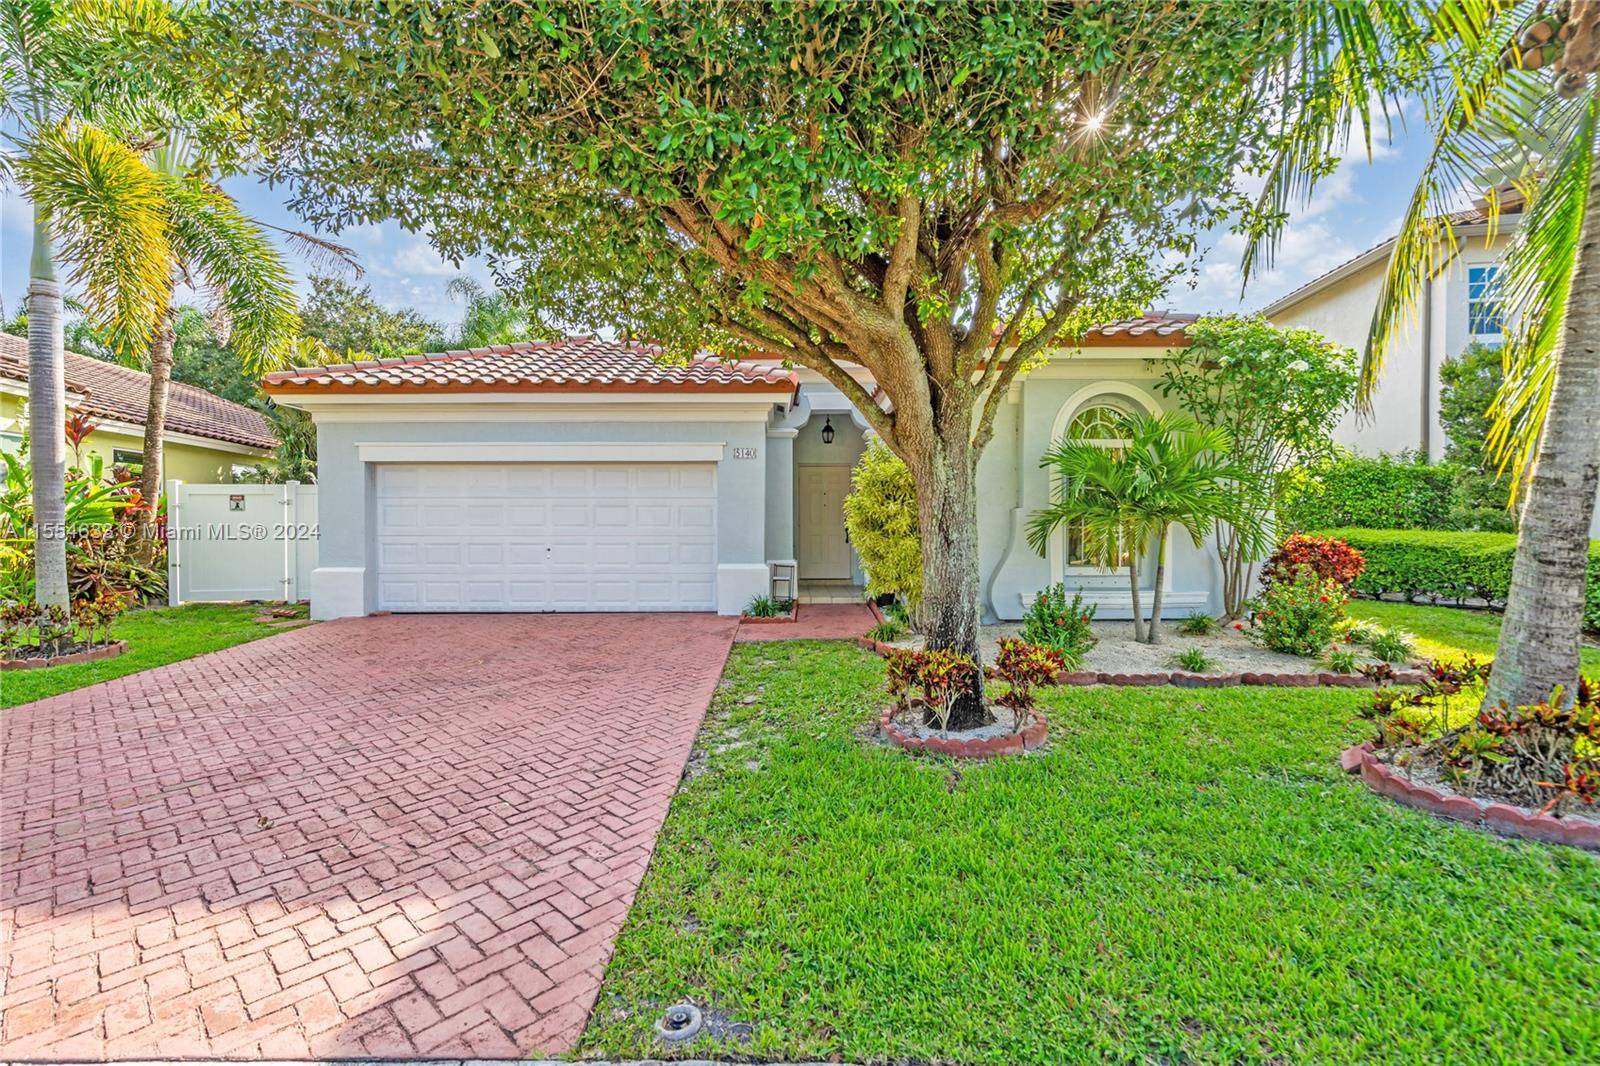 Spectacular Lakefront home in the exclusive neighborhood of Vizcaya in West Miramar centrally located near parks, major highways, and great schools with 3 residential gate entrances for your convenience.